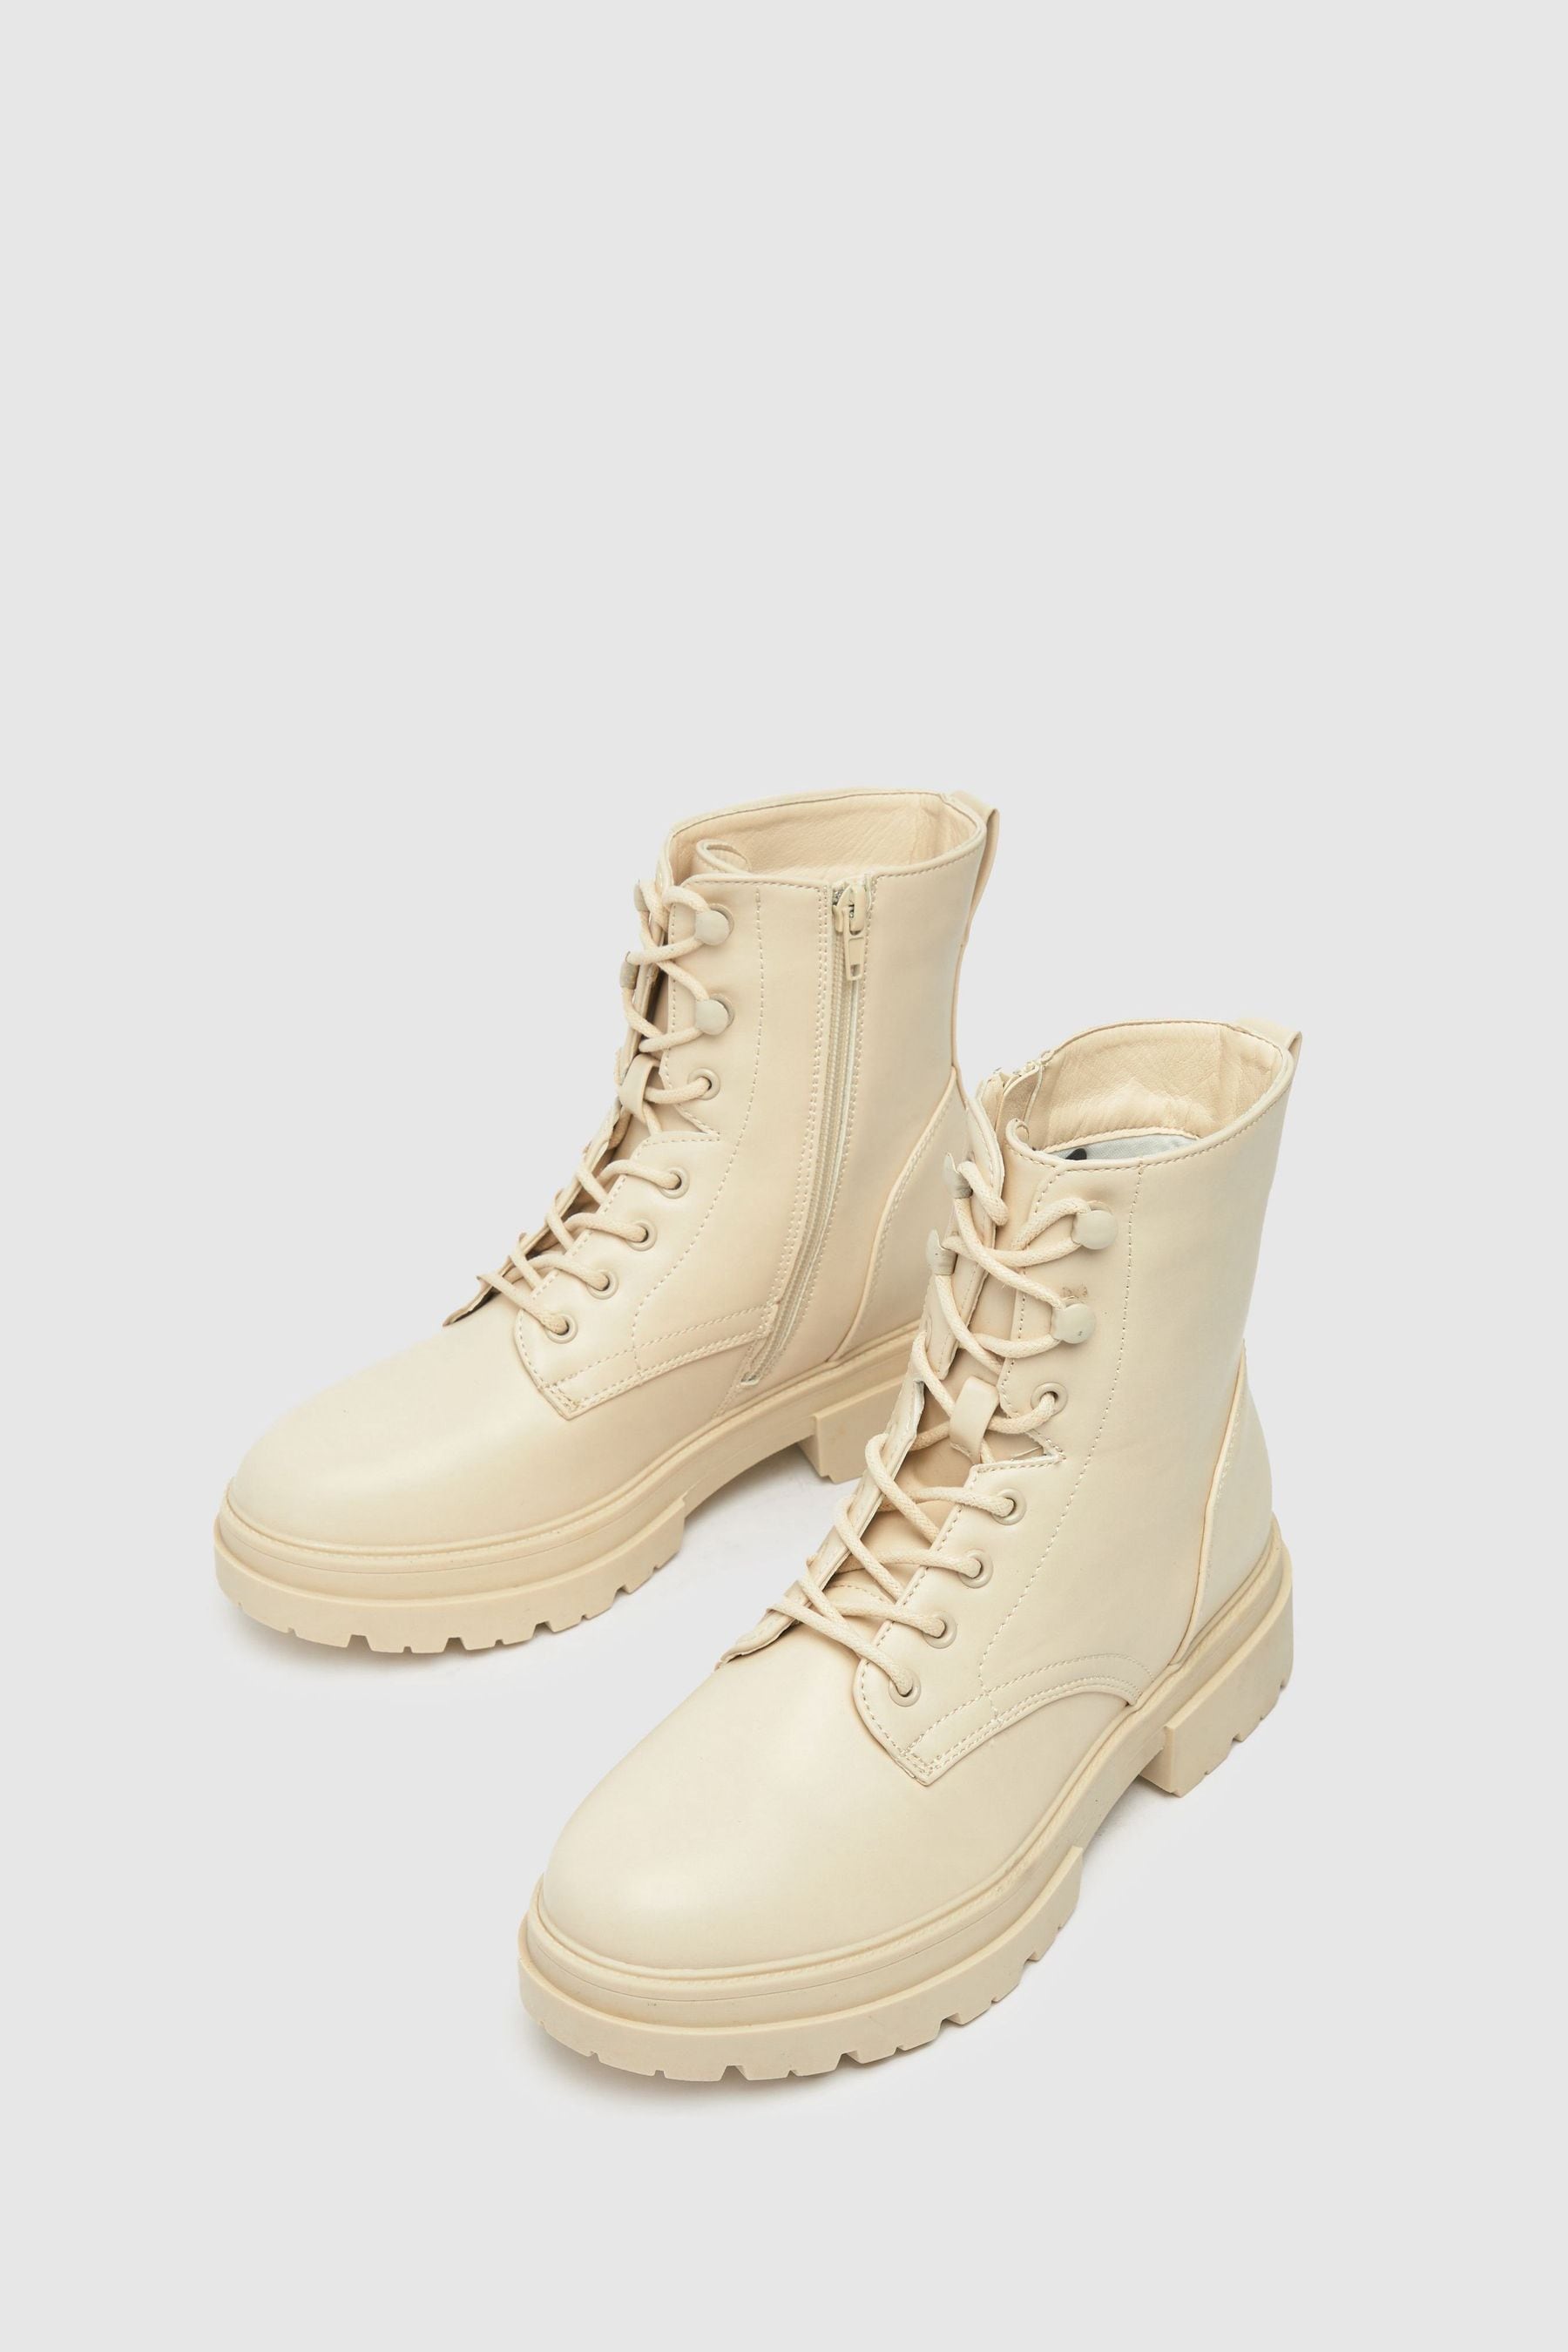 Buy Schuh Cream Ashton Chunky Lace Up Boots from the Next UK online shop